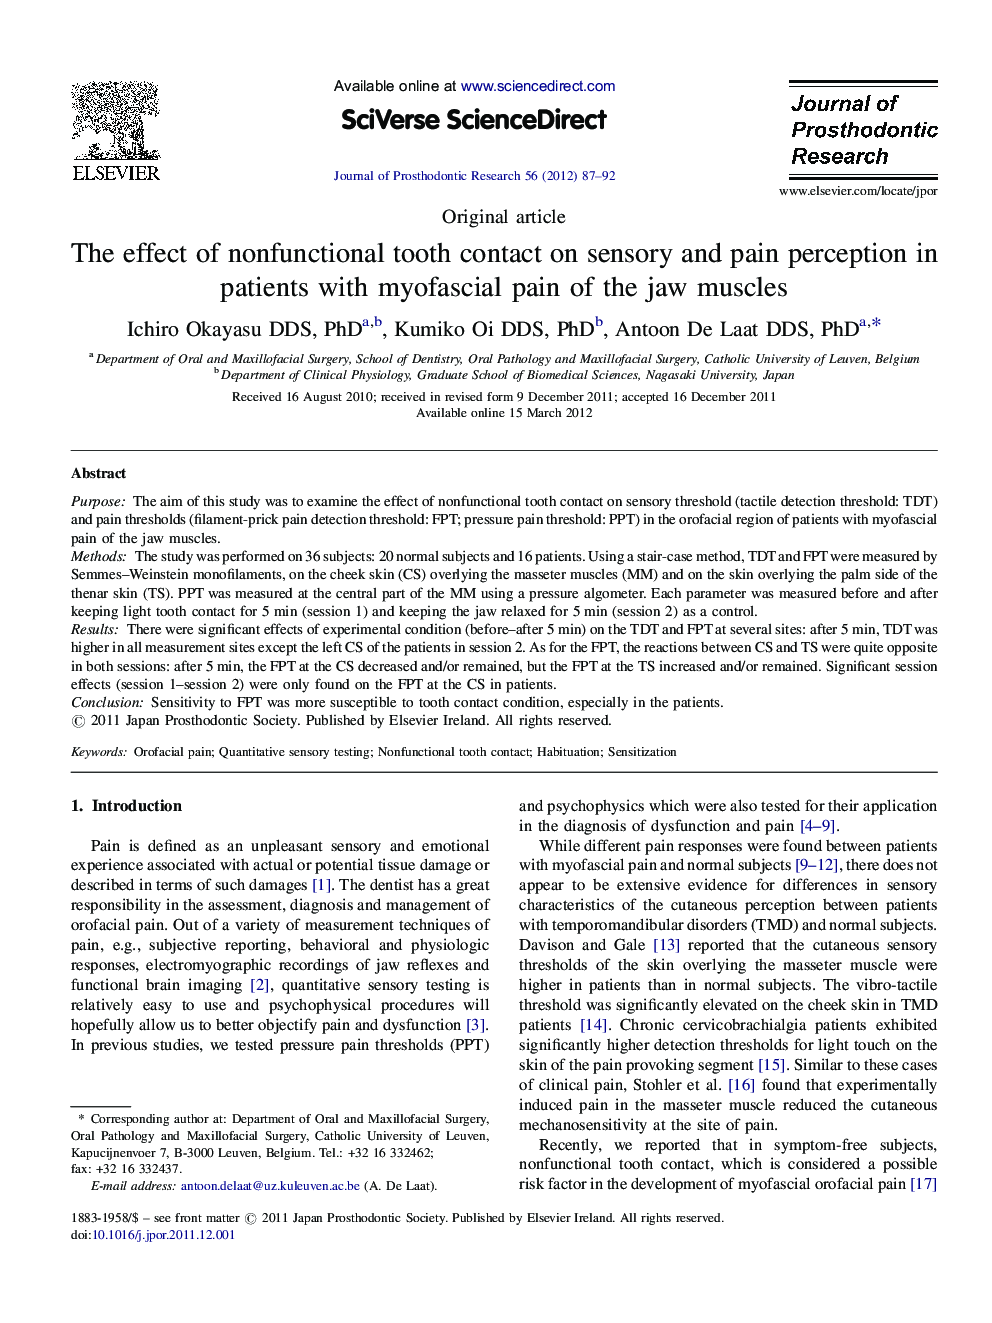 The effect of nonfunctional tooth contact on sensory and pain perception in patients with myofascial pain of the jaw muscles